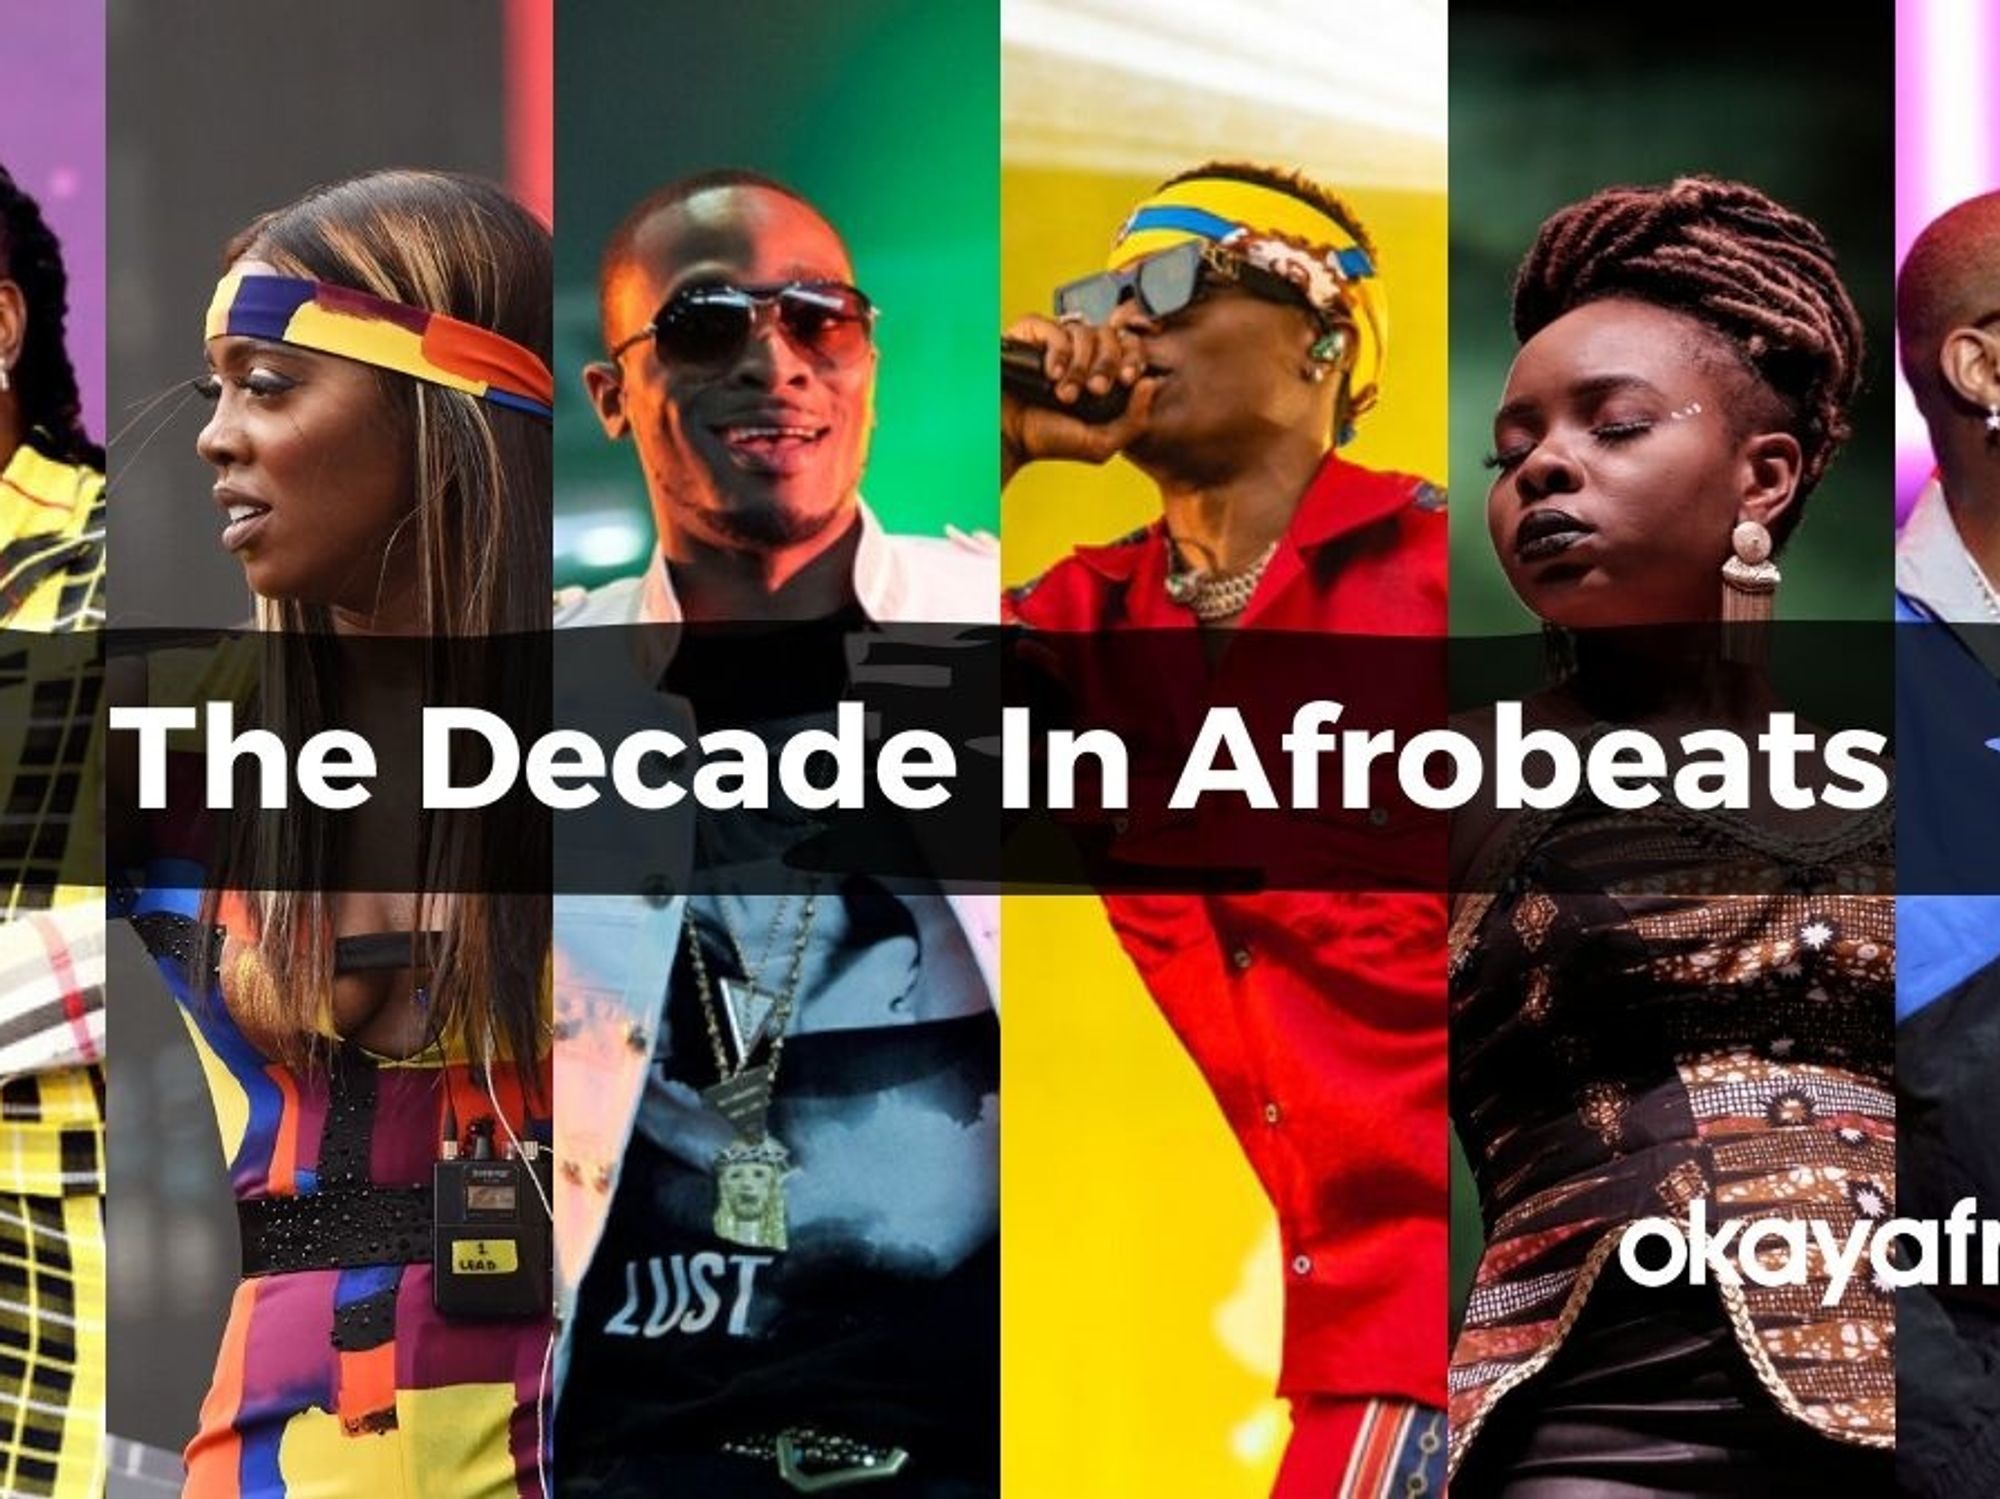 The Decade In Afrobeats: Top Artists Share the Moment They Knew African Pop Music Would Take Over the World